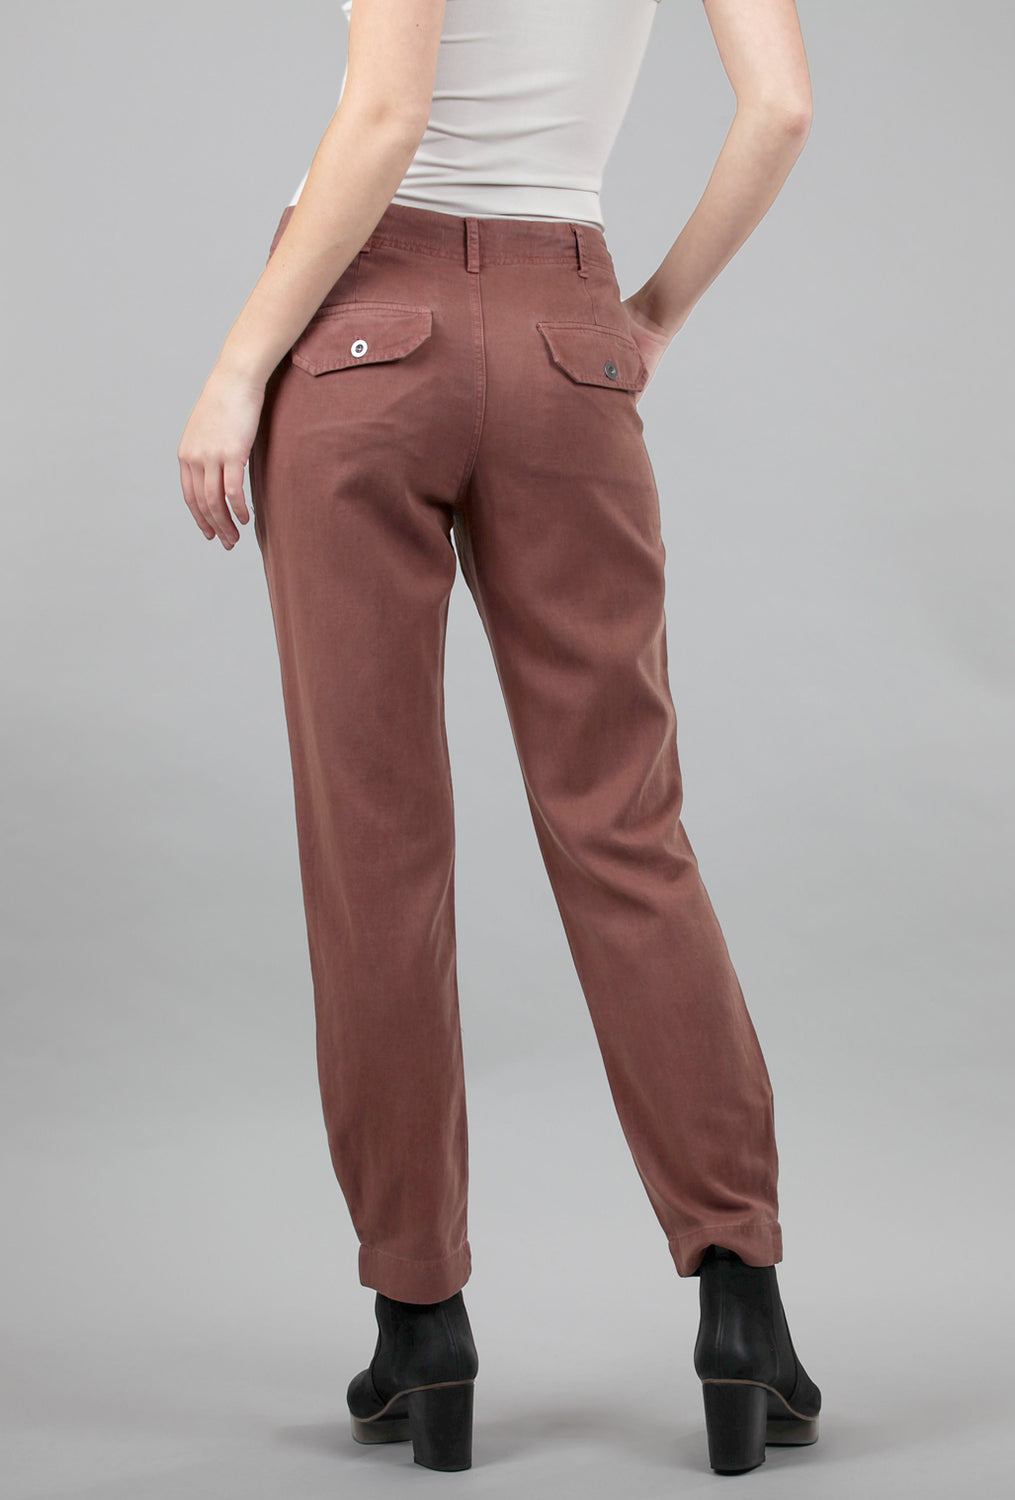 Pleated Cuff Utility Pant